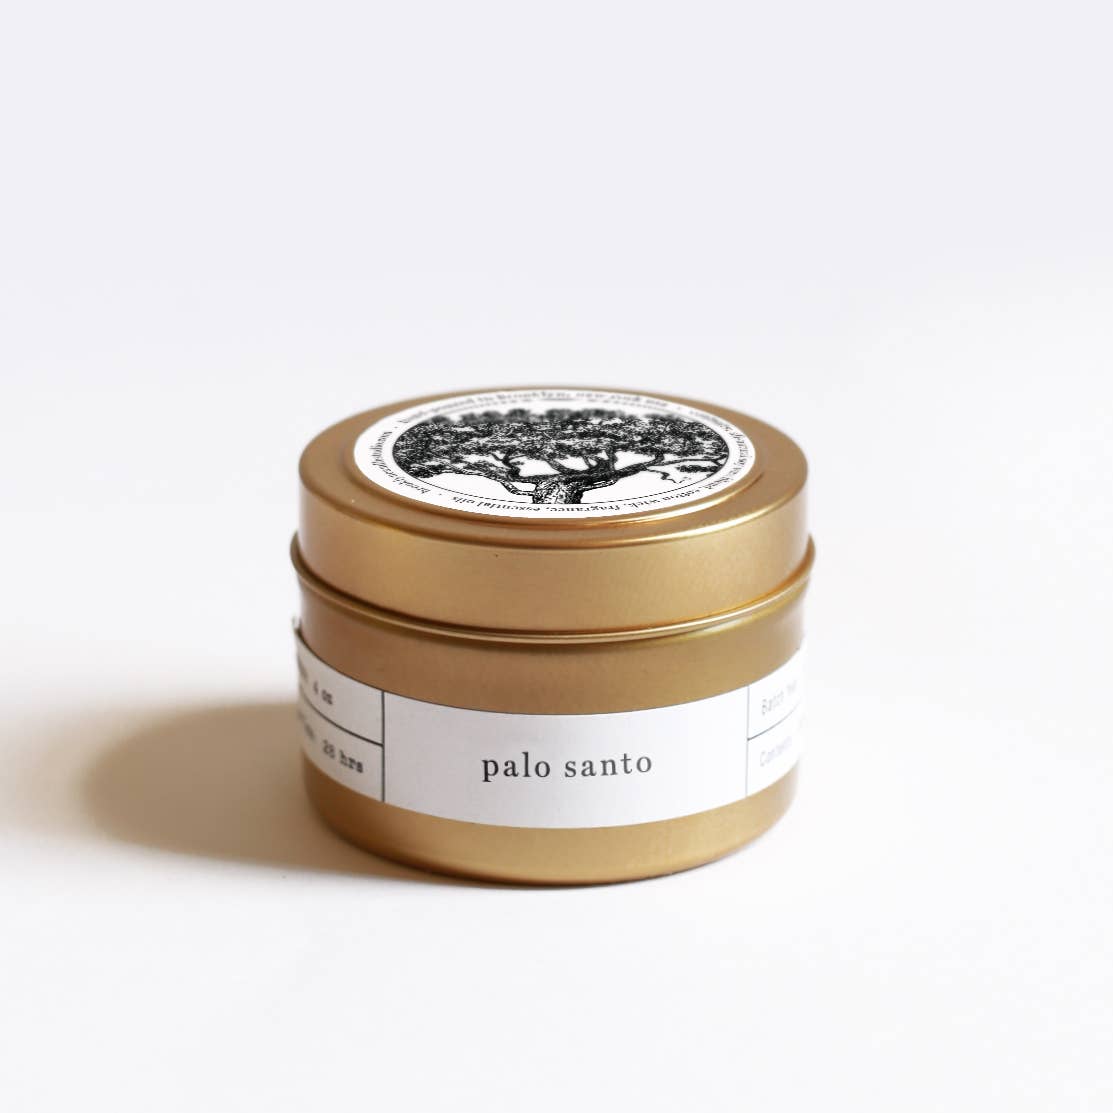 Palo Santo travel tin candle by Brooklyn Candle Studio